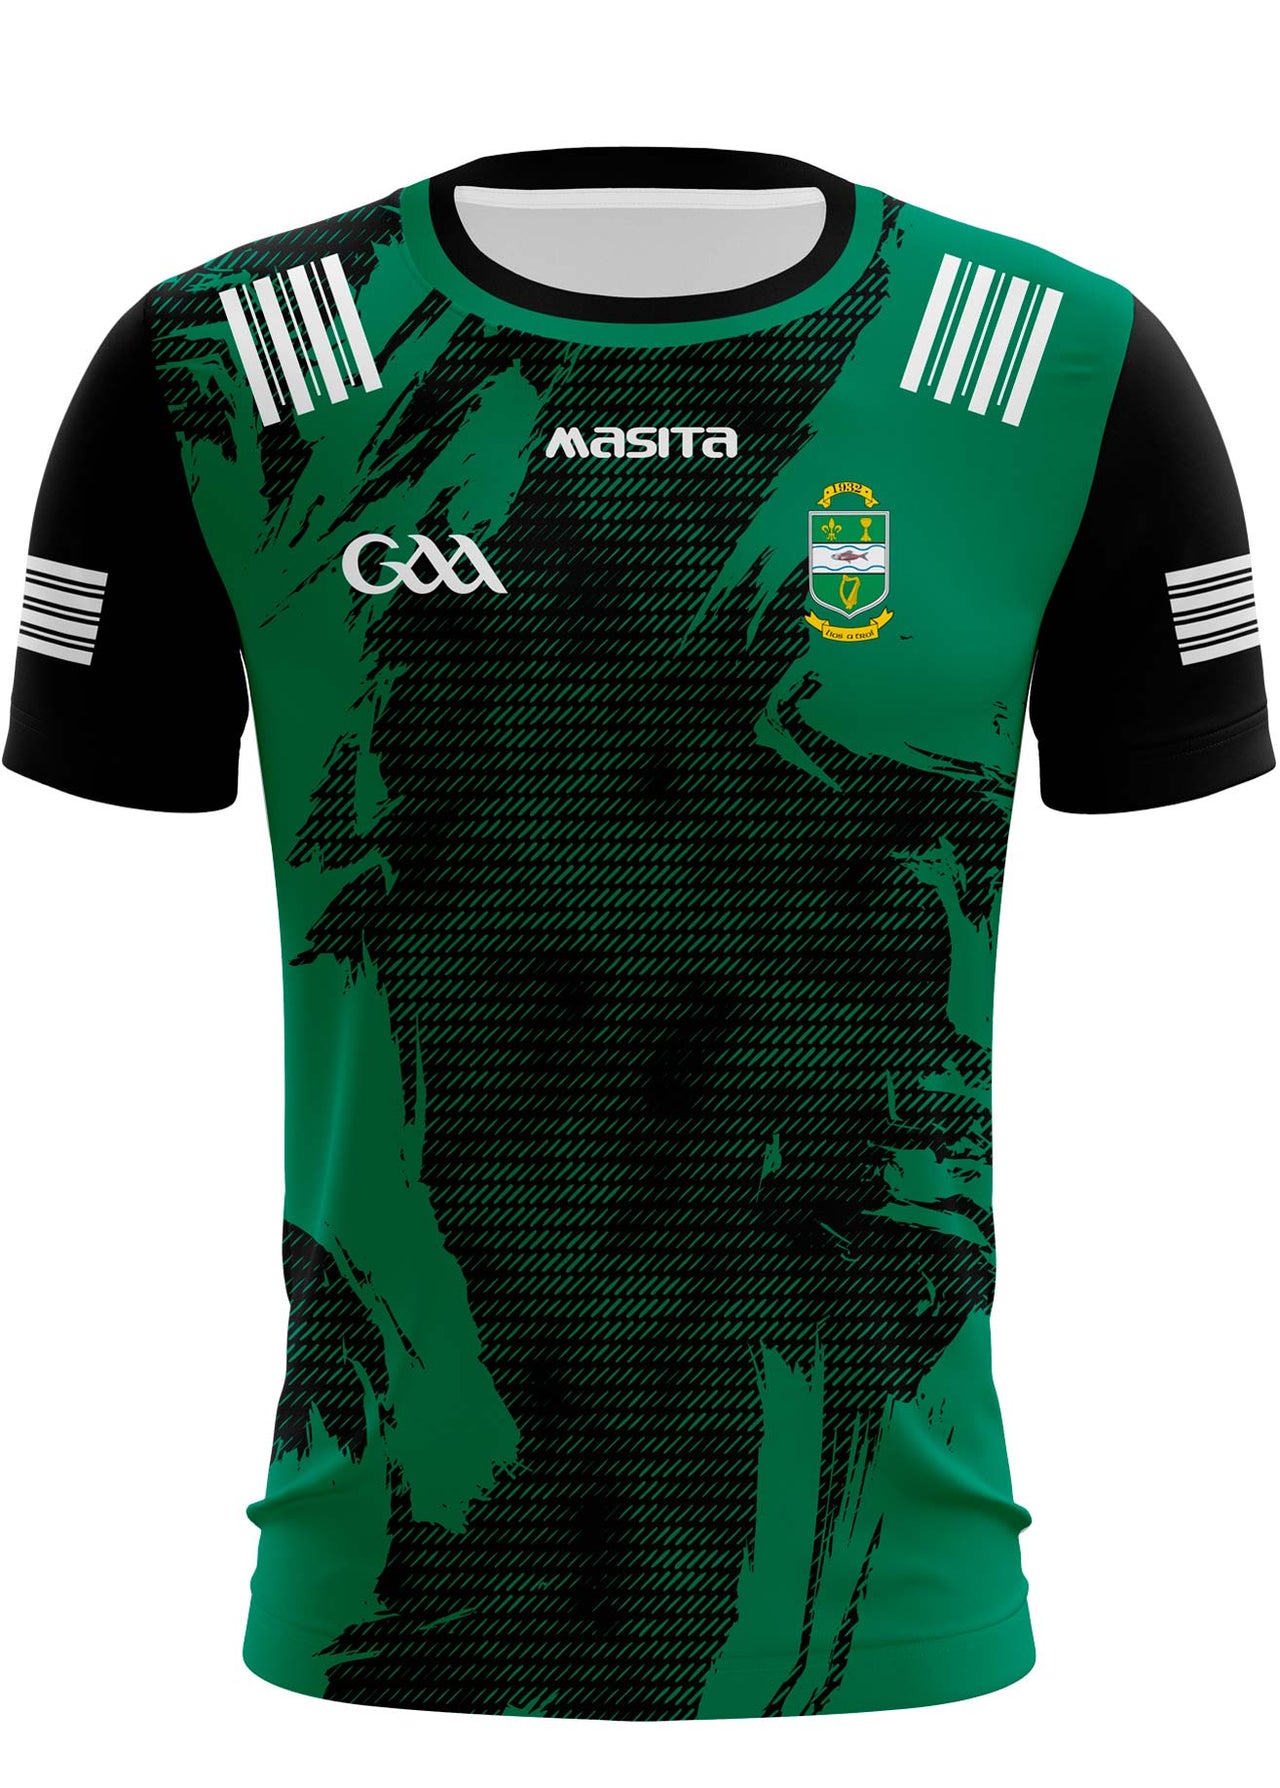 Listry GAA Training Boa Style Jersey Player Fit Adult